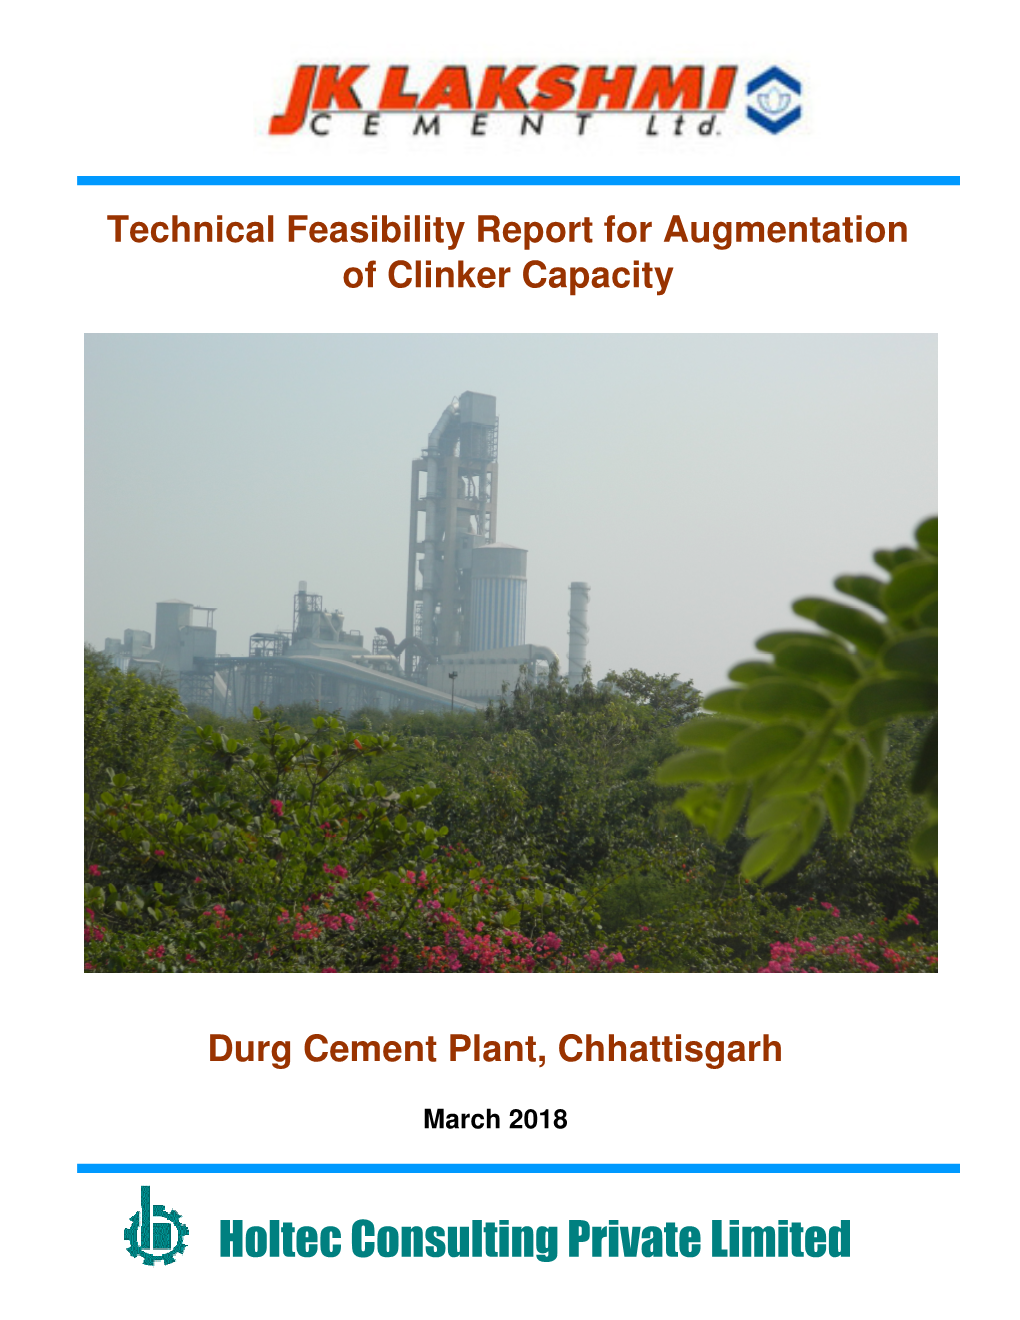 Holtec Consulting Private Limited Technical Feasibility Report for Augmentation of Clinker Capacity of Durg Cment Plant (DCP), Chhattisgarh